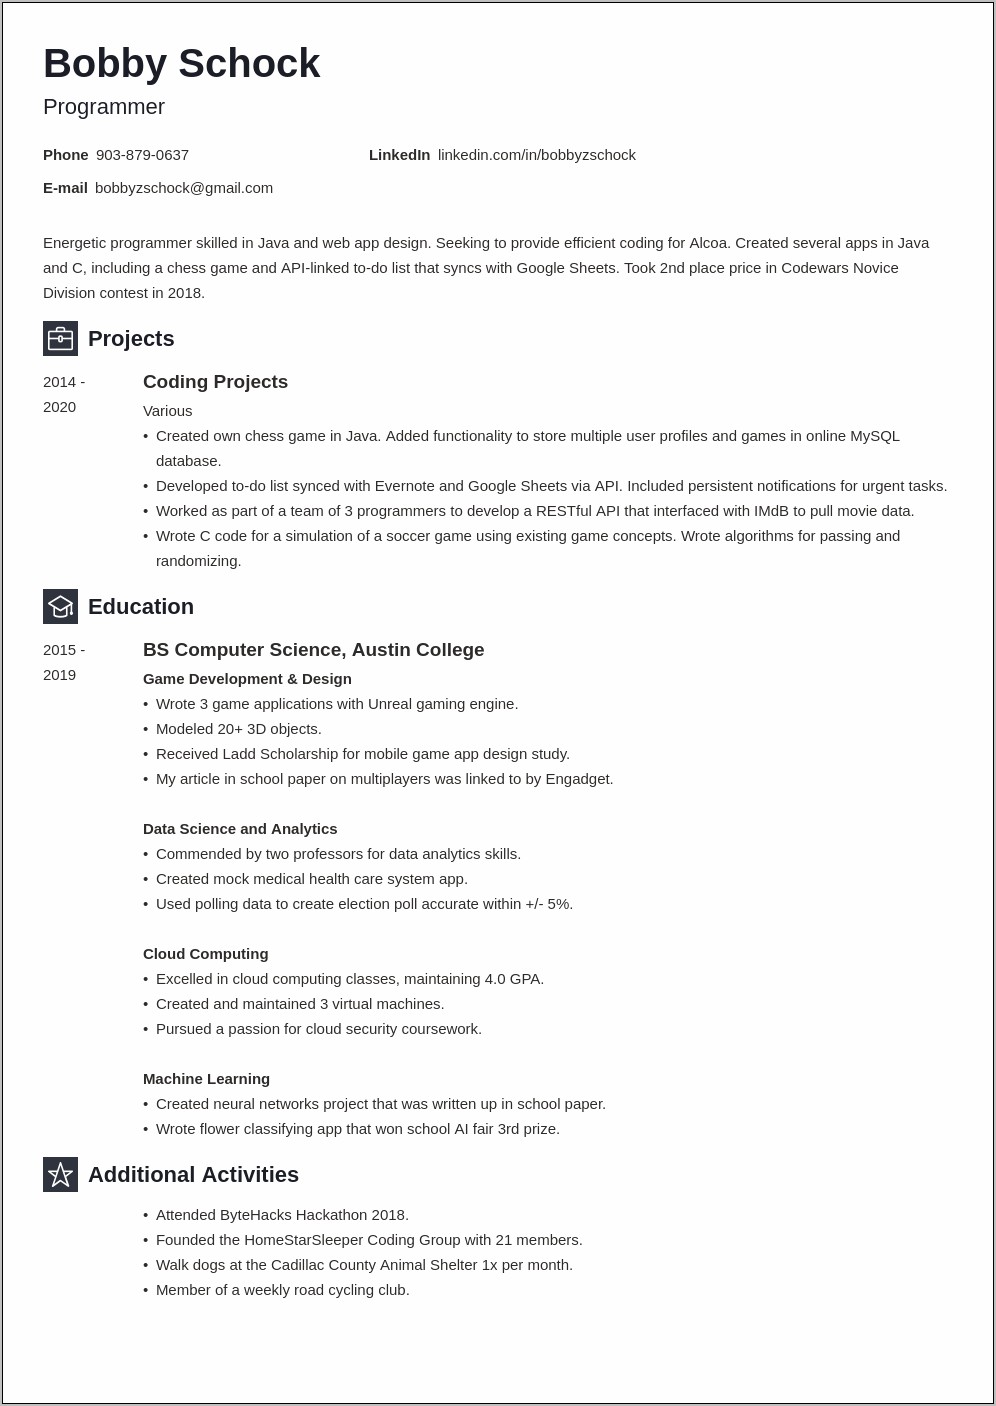 Resume Summary Statement With Little Experience